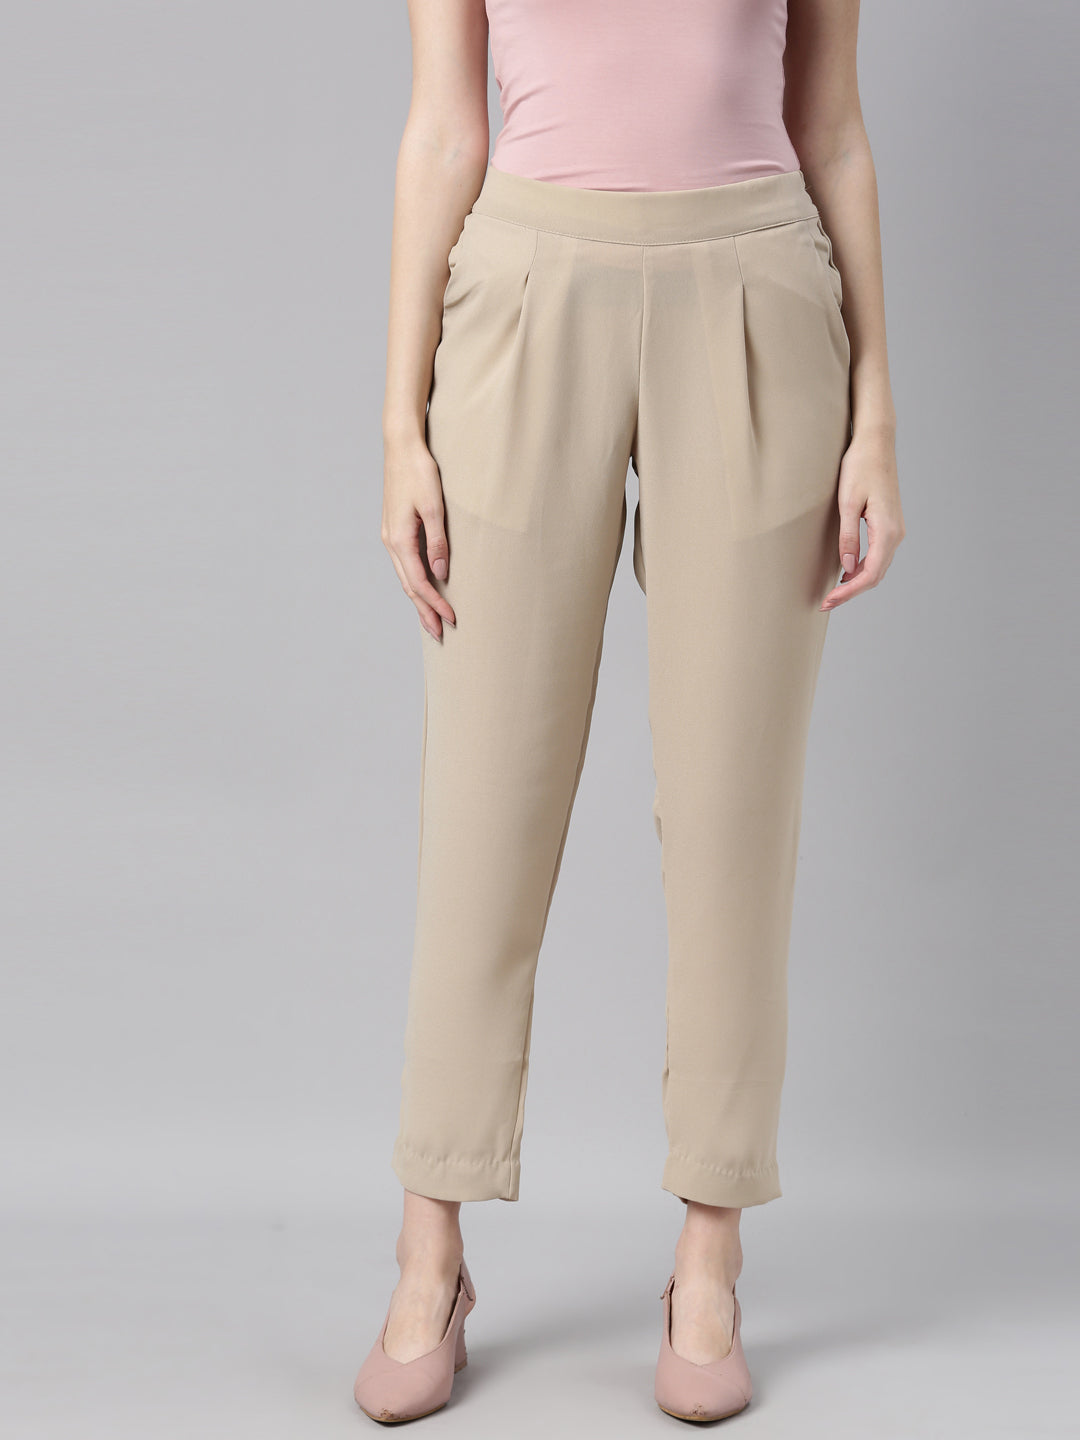 Women Solid Light Beige Mid Rise Cropped Jeggings